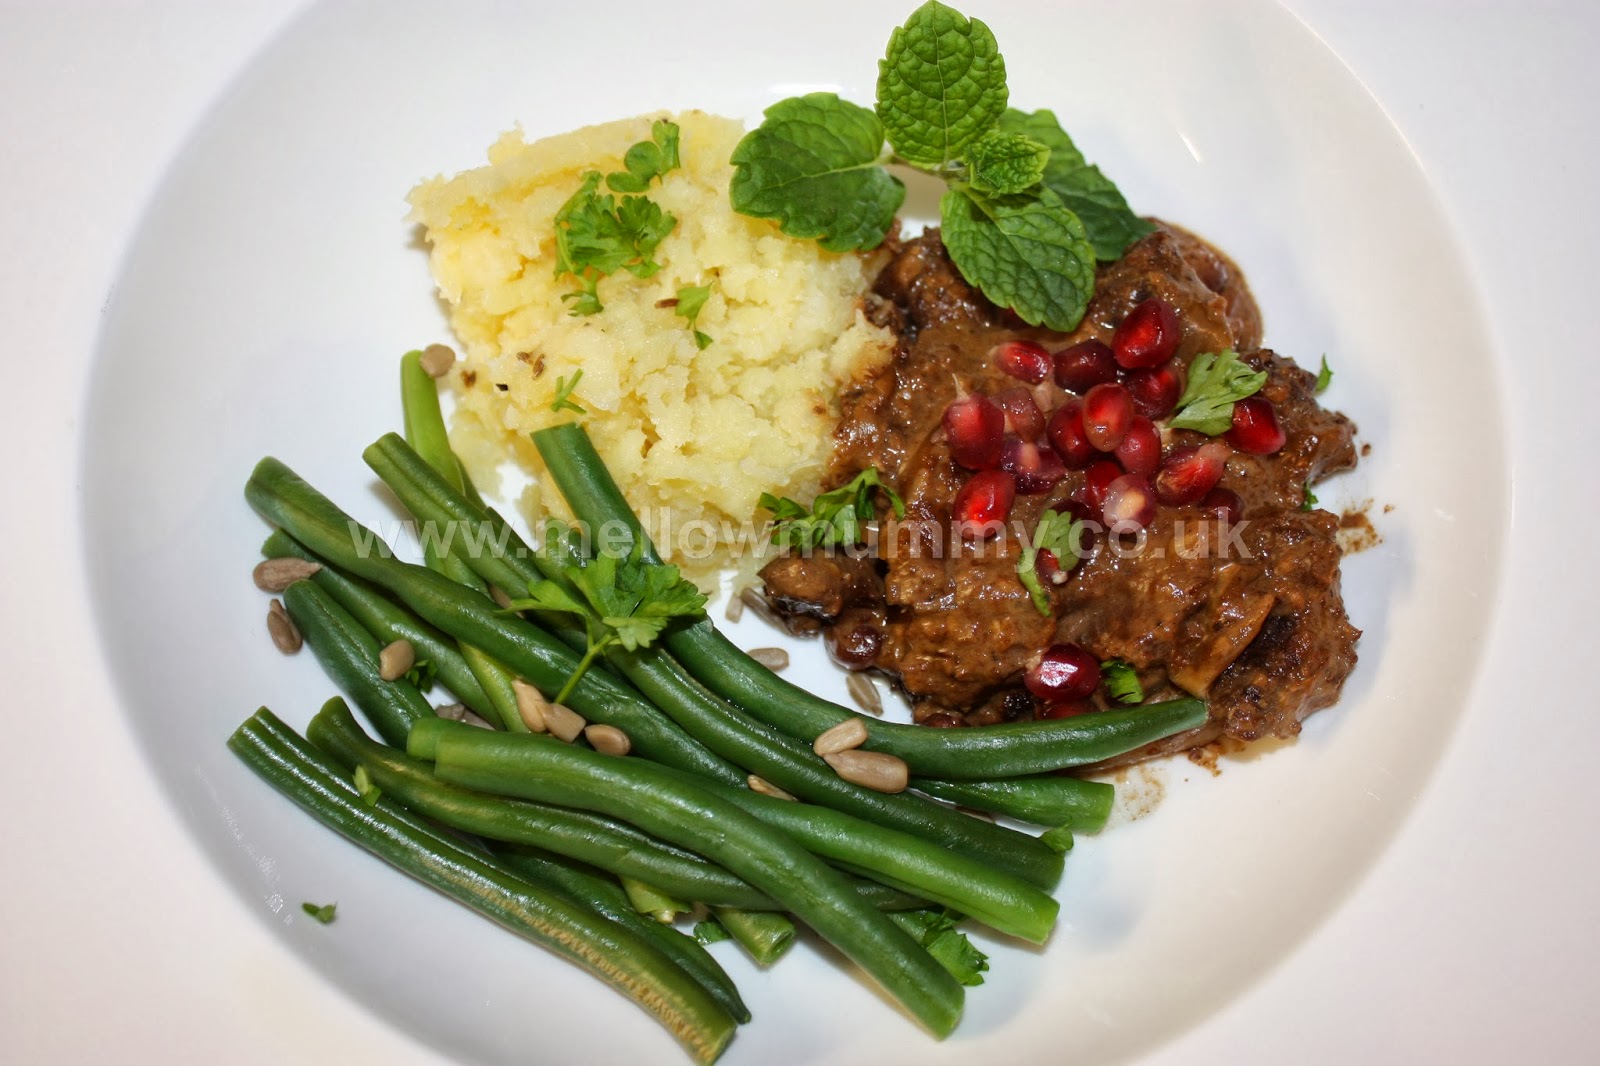 Recipe for slow cooked Persian venison with pomegranate and a cumin and parsnip mash